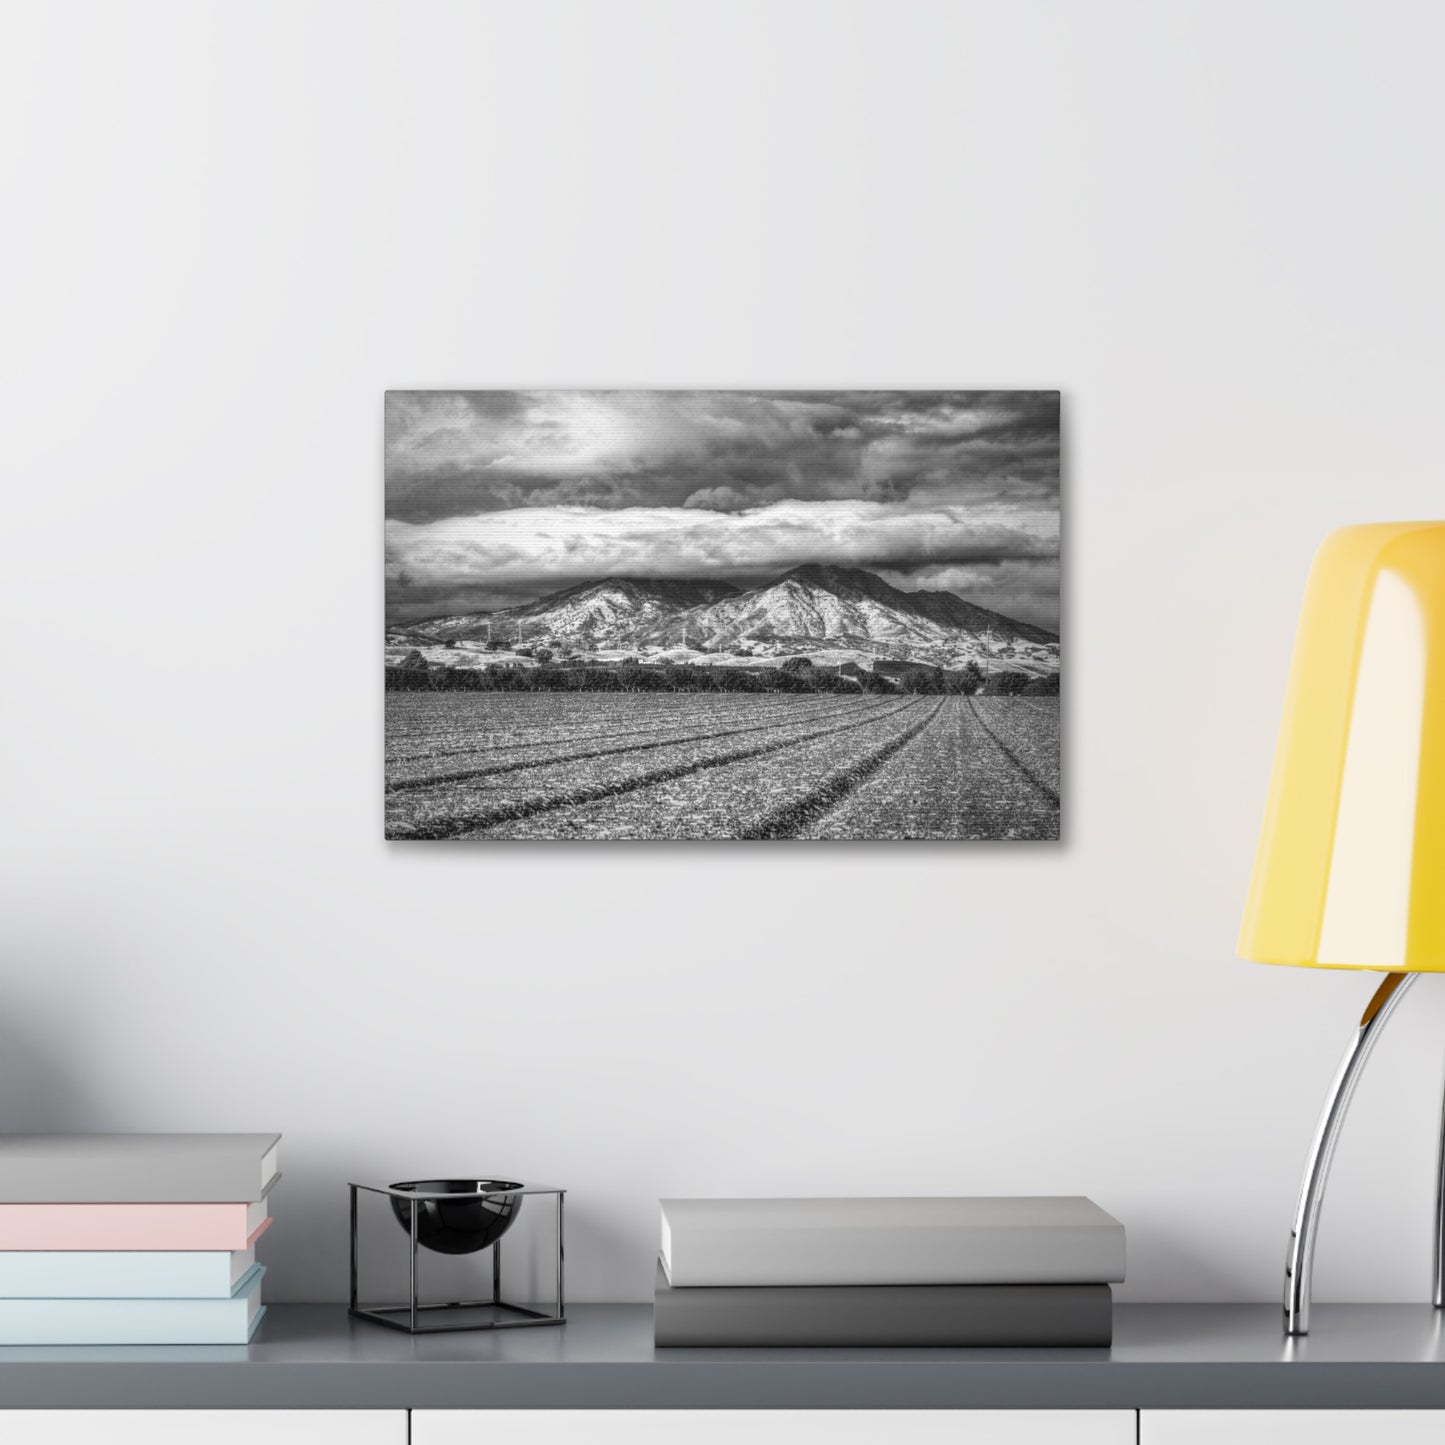 Canvas Print Of Mount Diablo In California For Wall Art